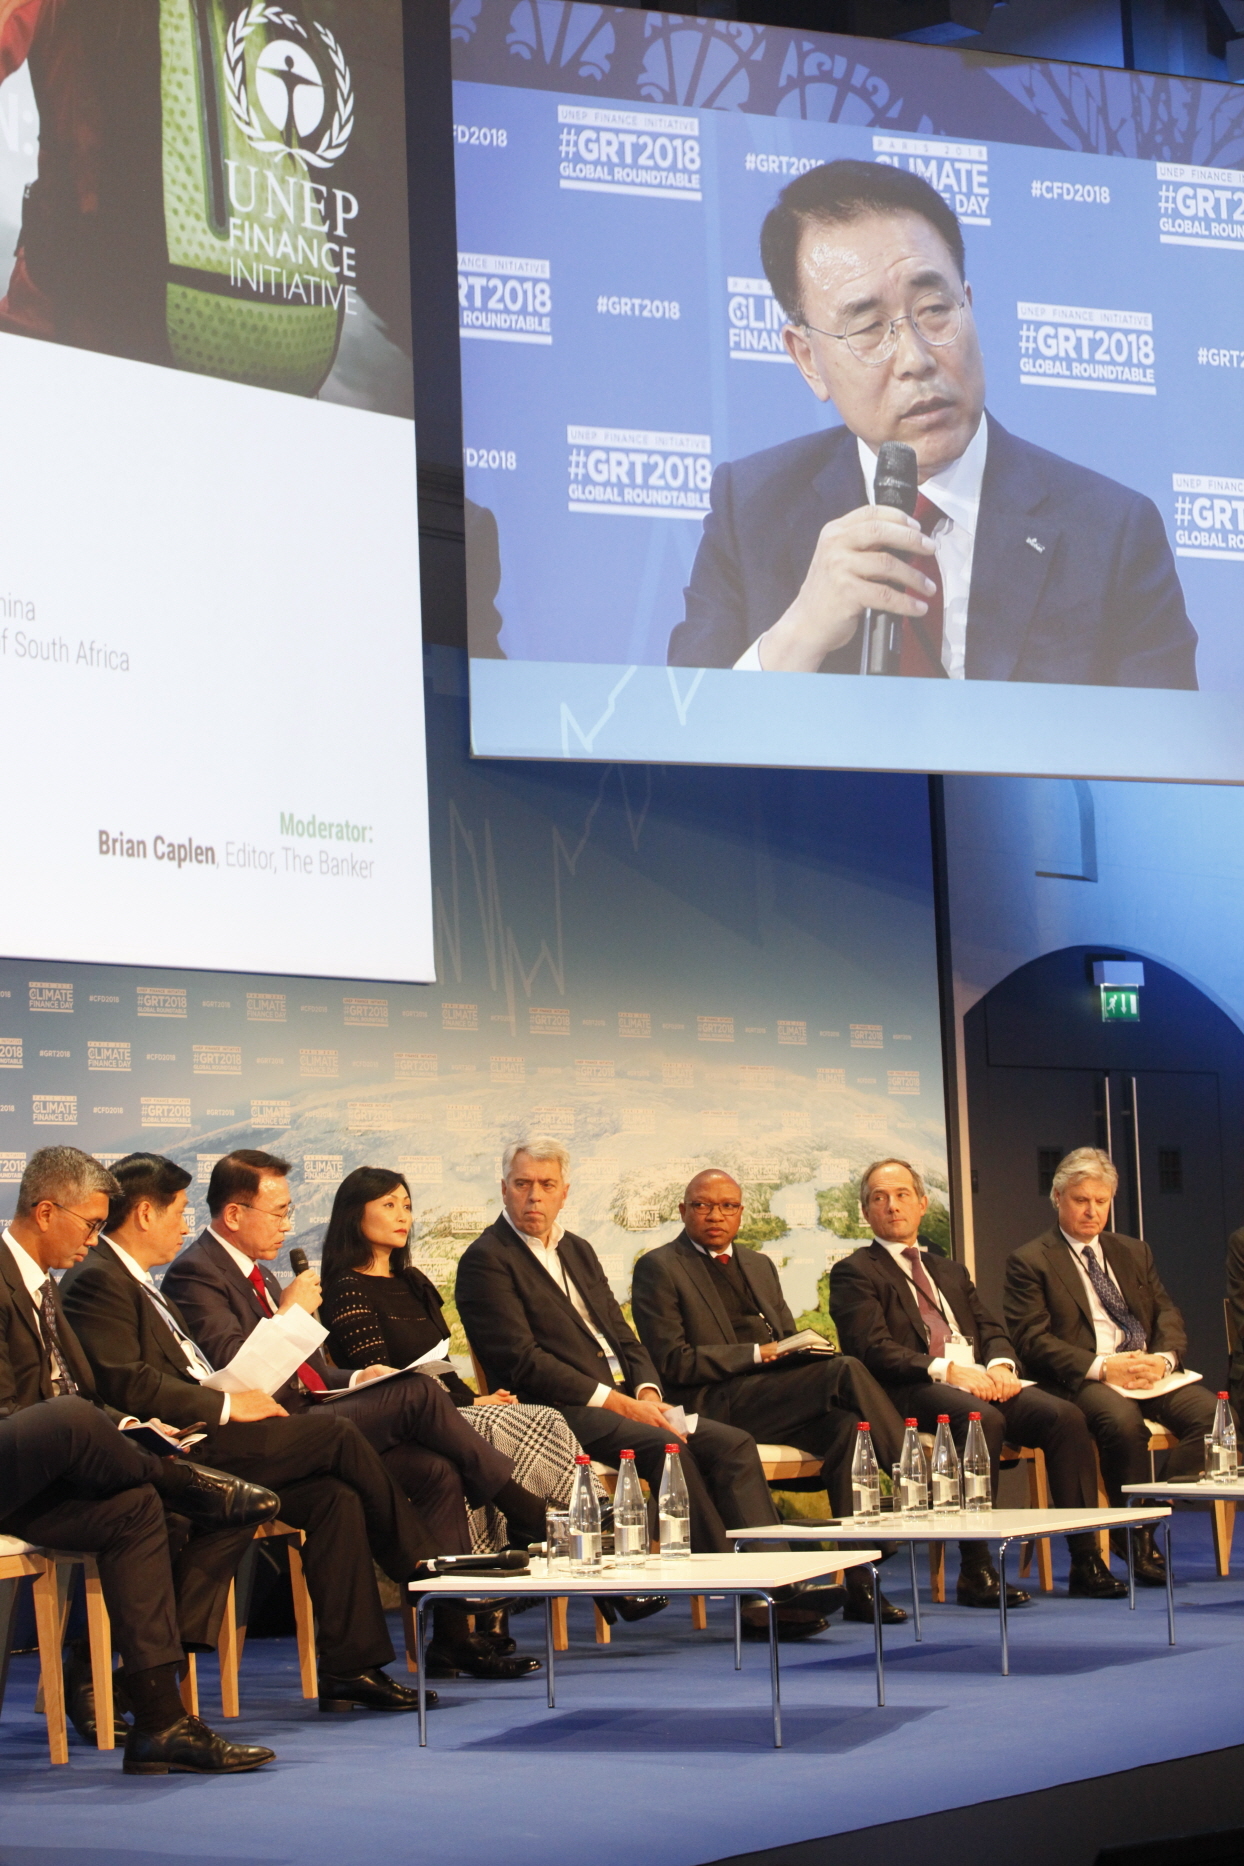 Shinhan Financial Group Chairman Cho Yong-byoung attends the United Nations Environment Program Finance Initiative roundtable held in November last year in Paris. At the occasion, Shinhan Financial took part in drafting and effectuating Principles for Responsible Banking, global guidelines for sustainable banking activities. (Shinhan Financial)